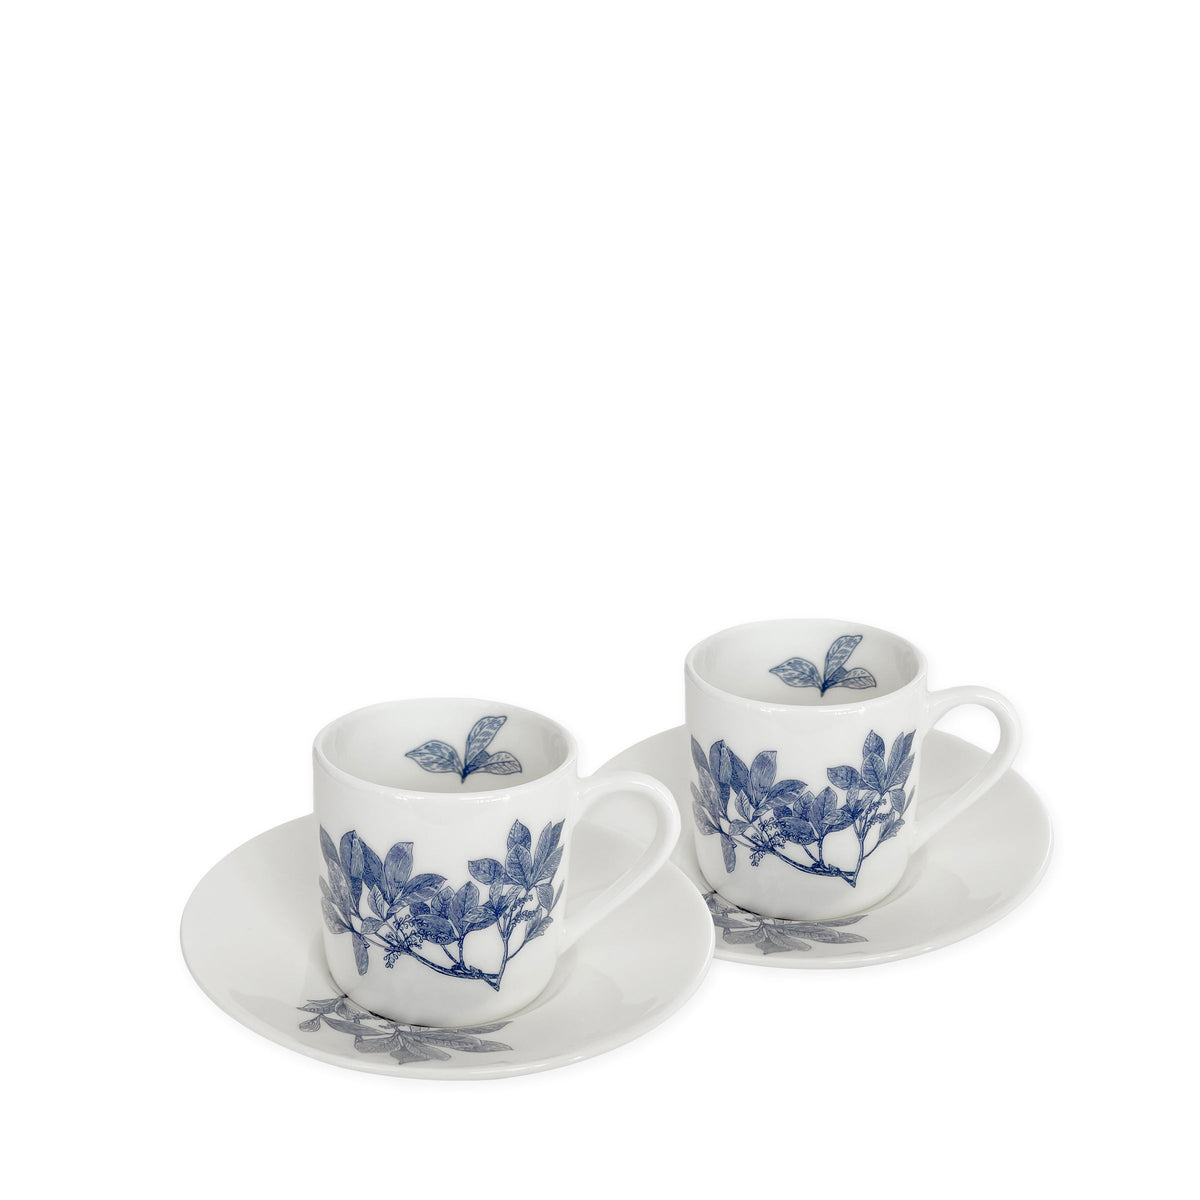 Two white ceramic cups with matching saucers, each adorned with blue floral designs, are perfect additions to any Blue and White Dinnerware collection. The Arbor Espresso Cups &amp; Saucers, Set of 2 by Caskata are microwave-safe pieces that offer both beauty and practicality for everyday use.